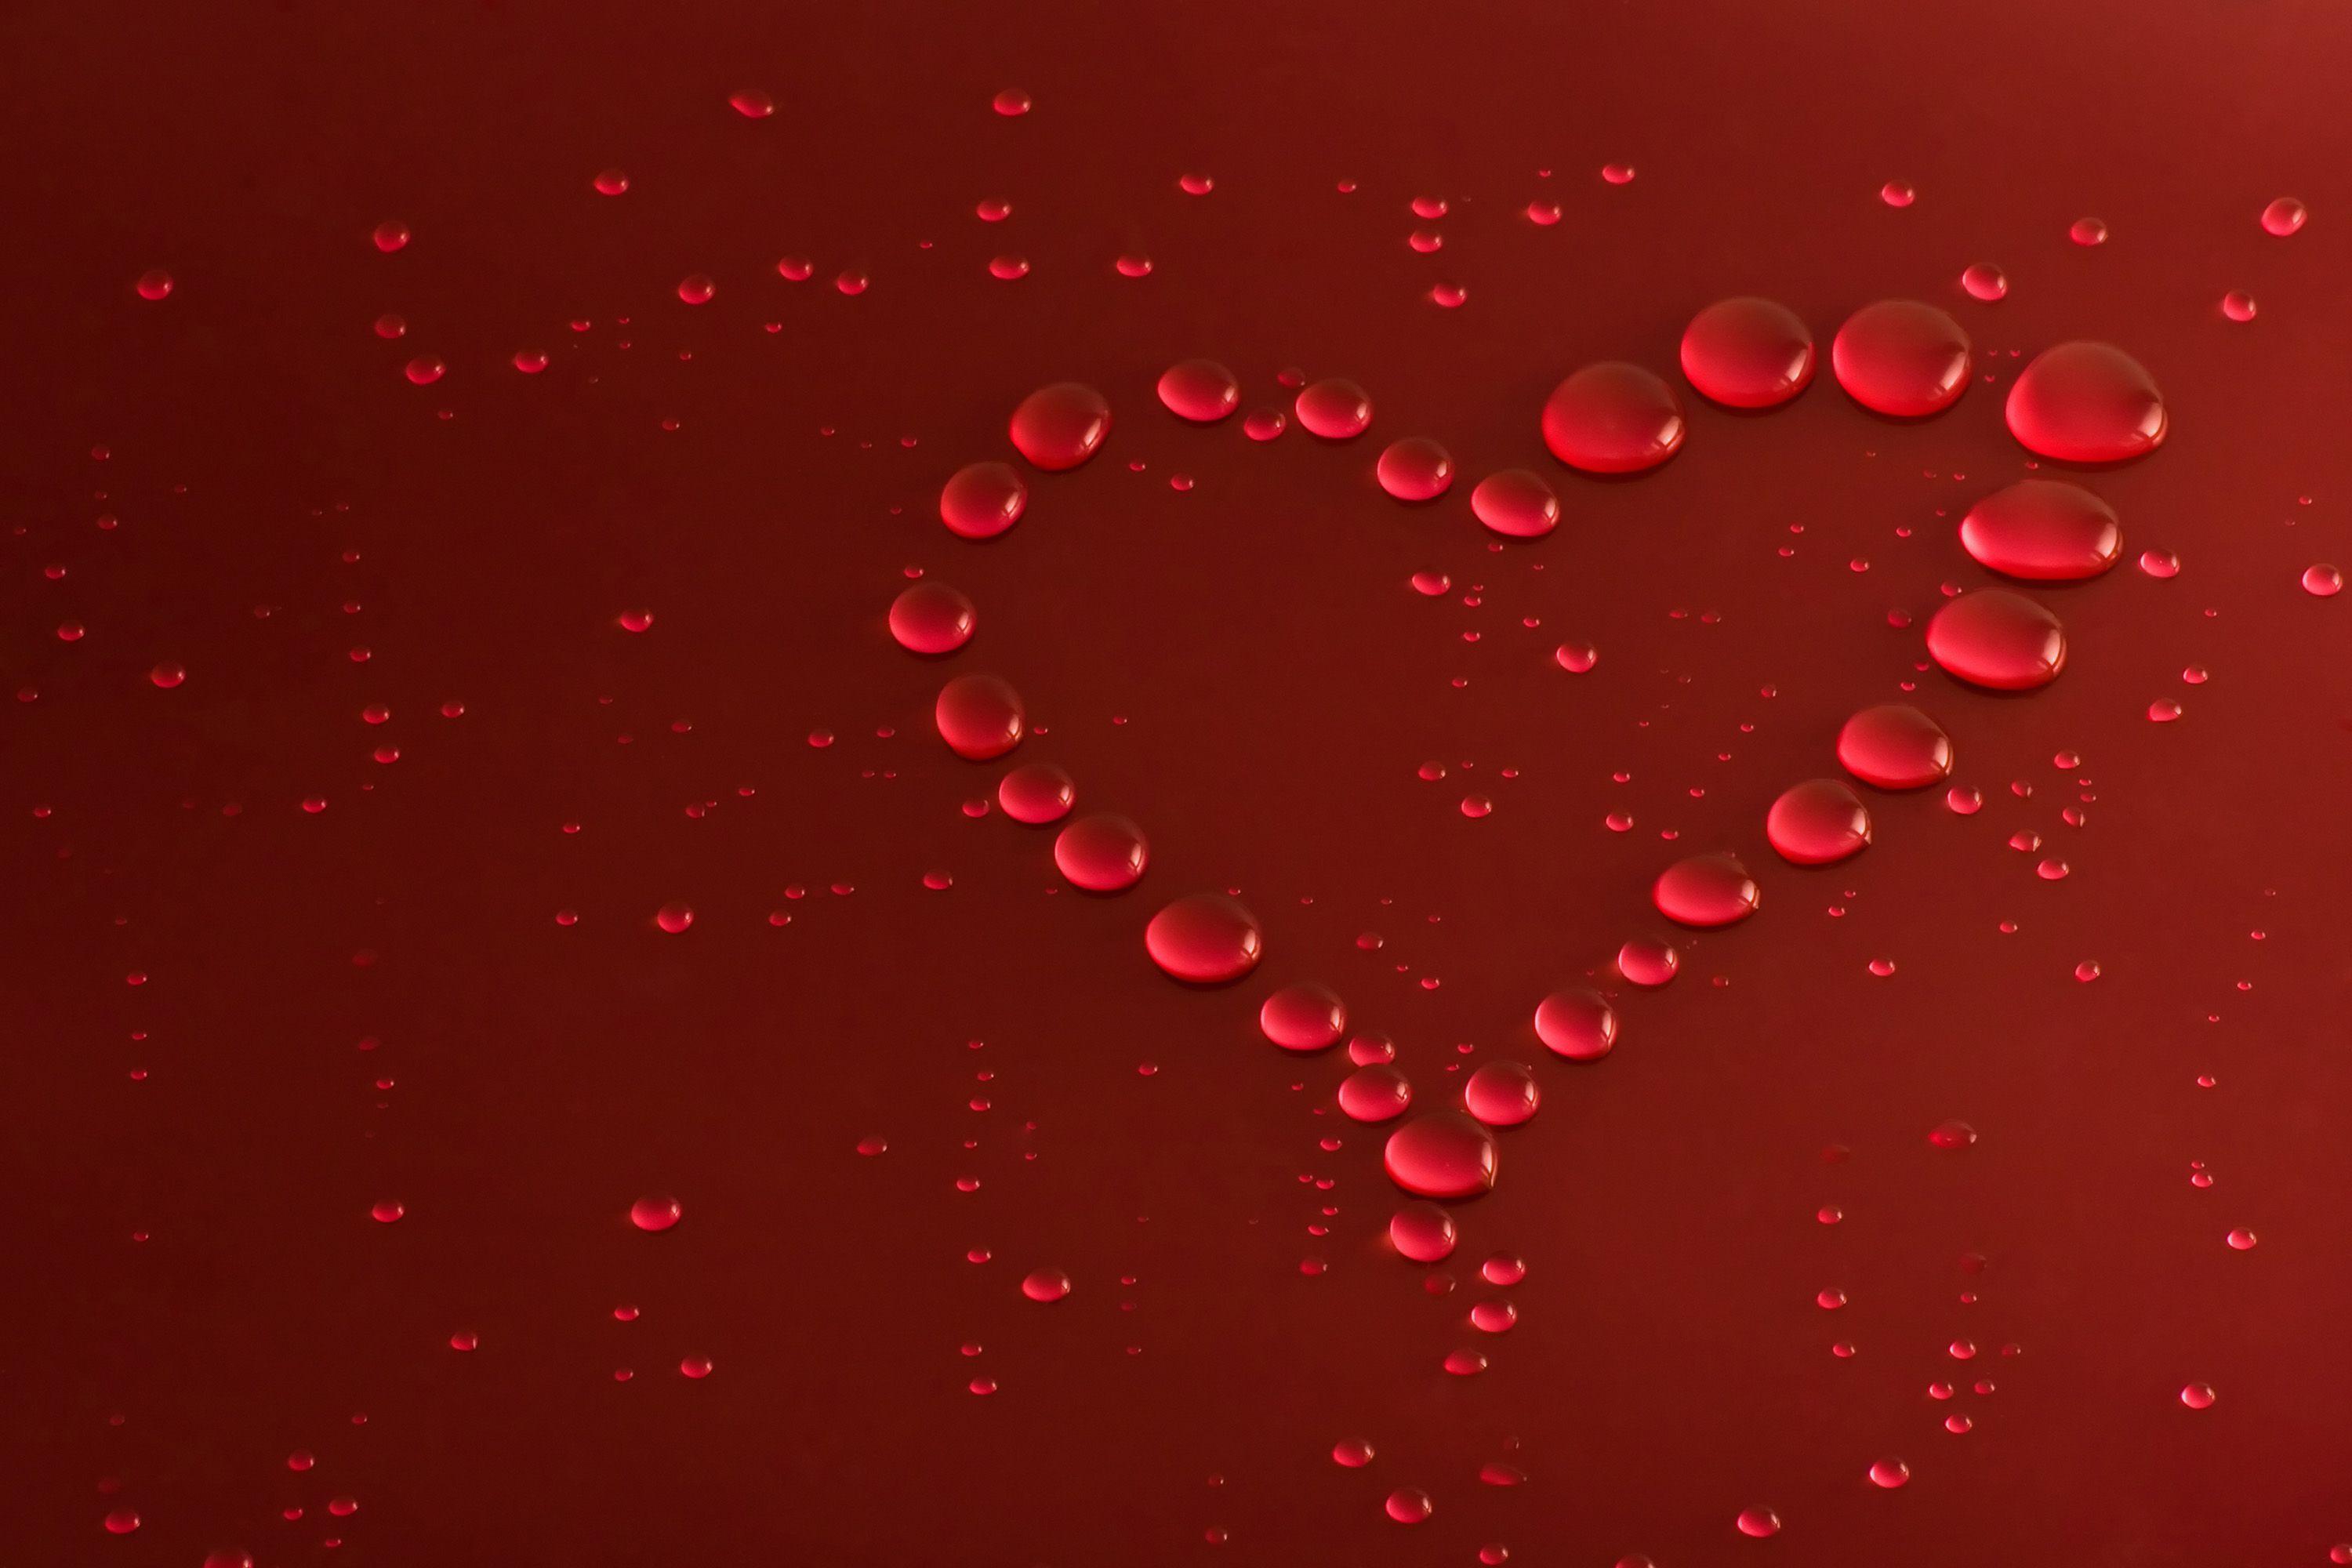 Red Love Heart HD Wallpaper with Water Drops. Paravu.com. HD